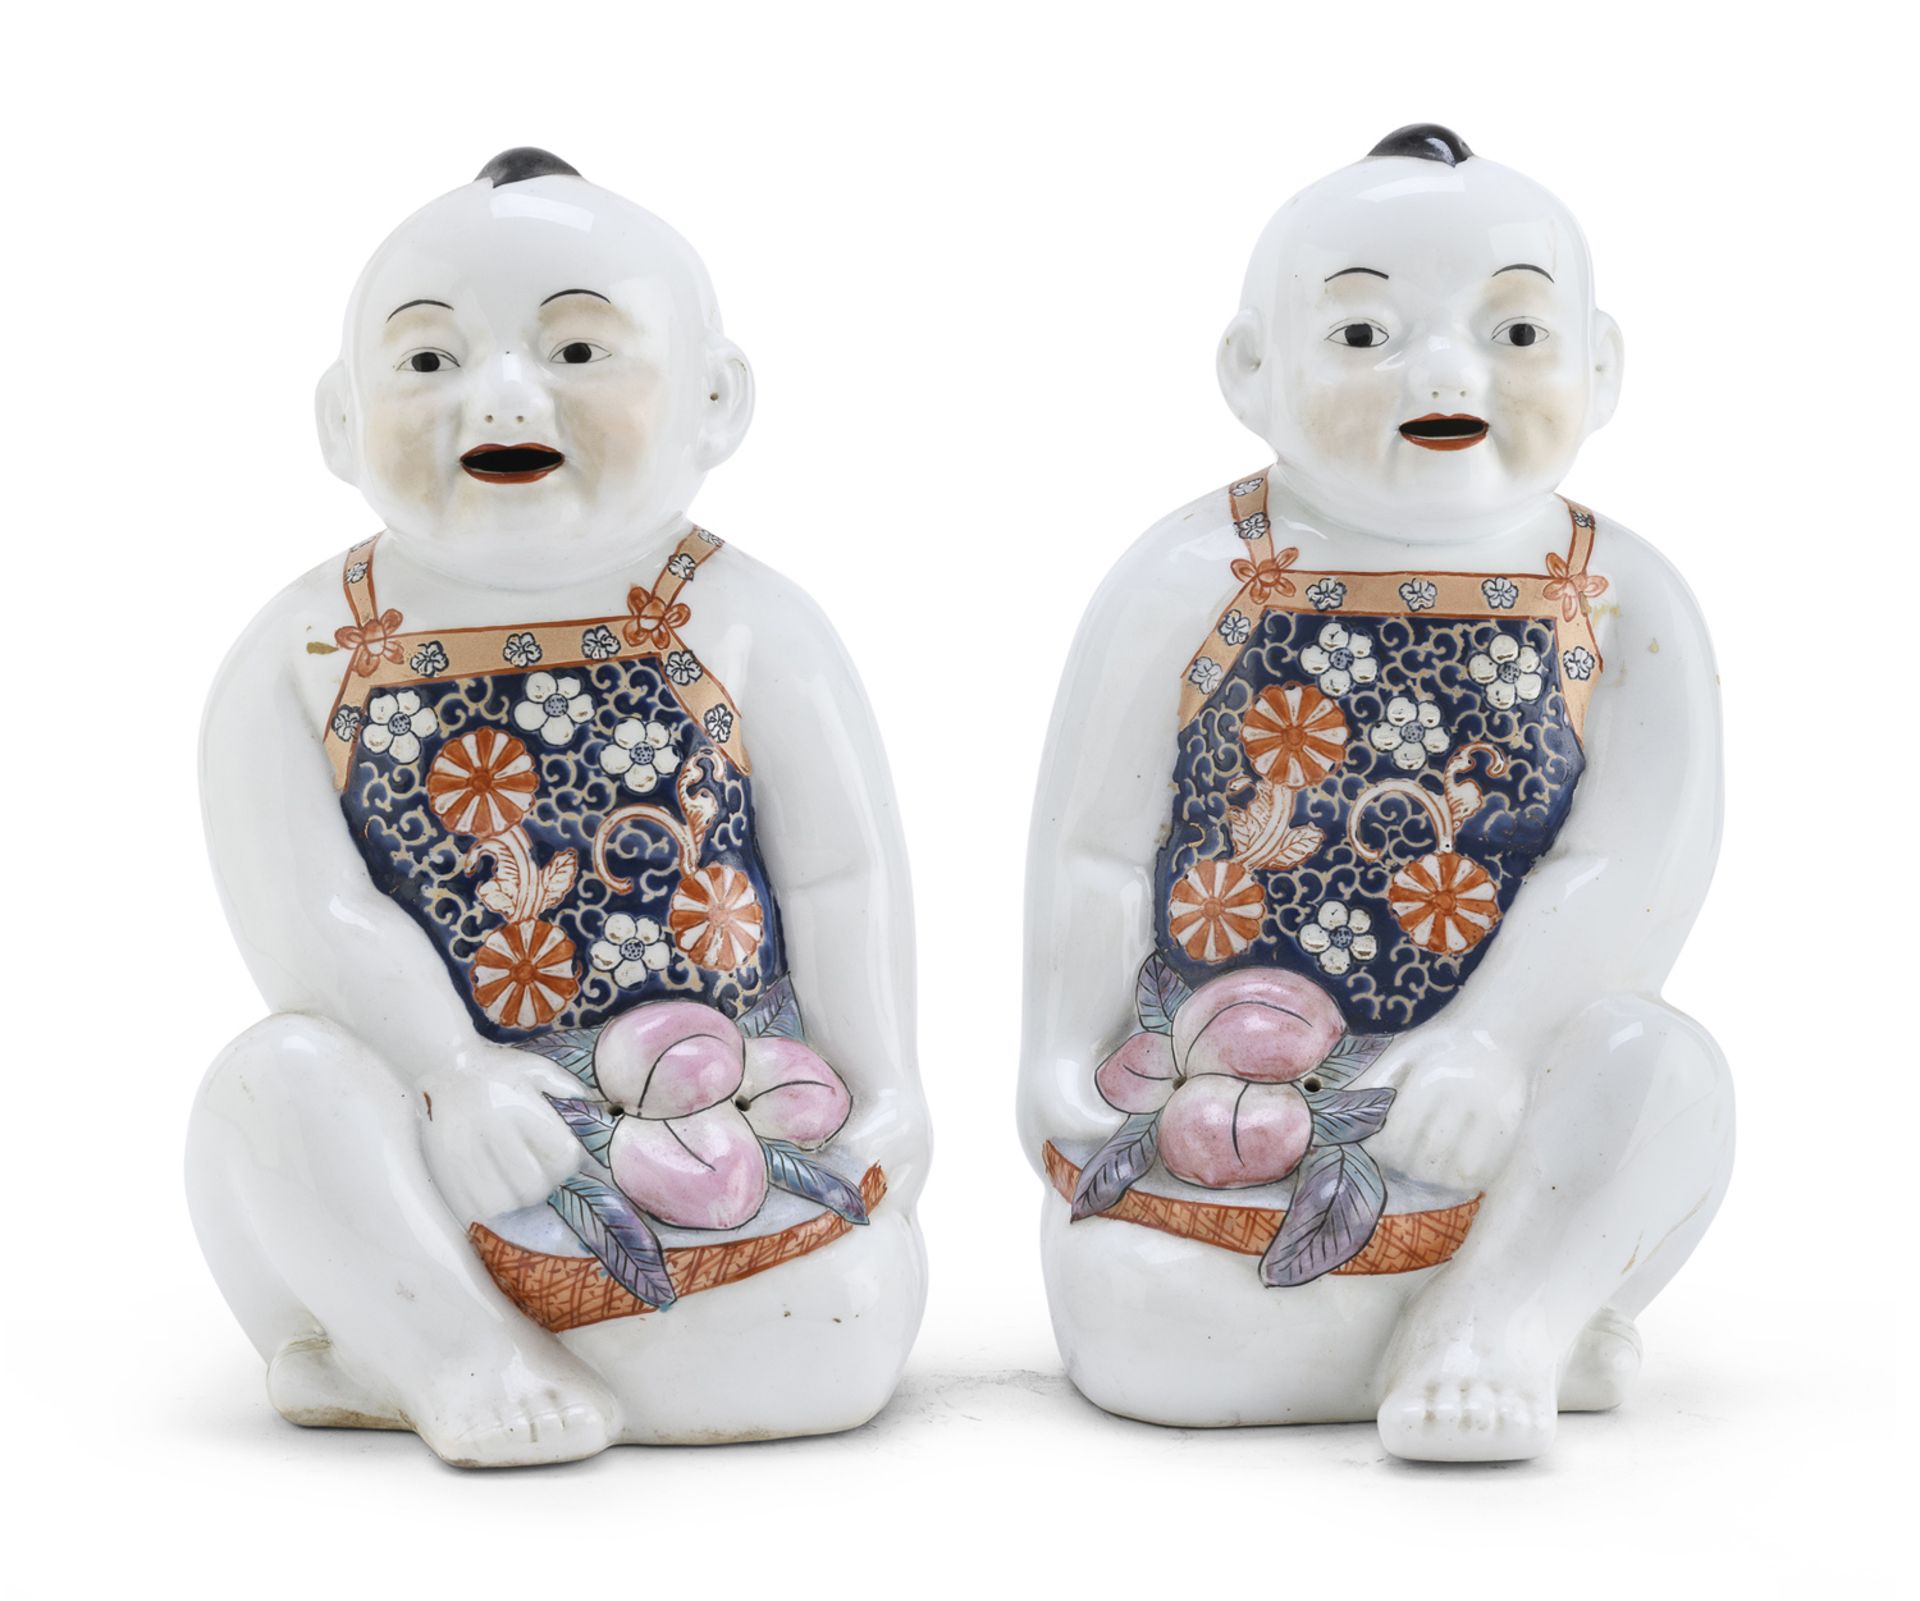 A PAIR OF CHINESE POLYCHROME ENAMELED PORCELAIN CHILDREN SCULPTURES 20TH CENTURY.